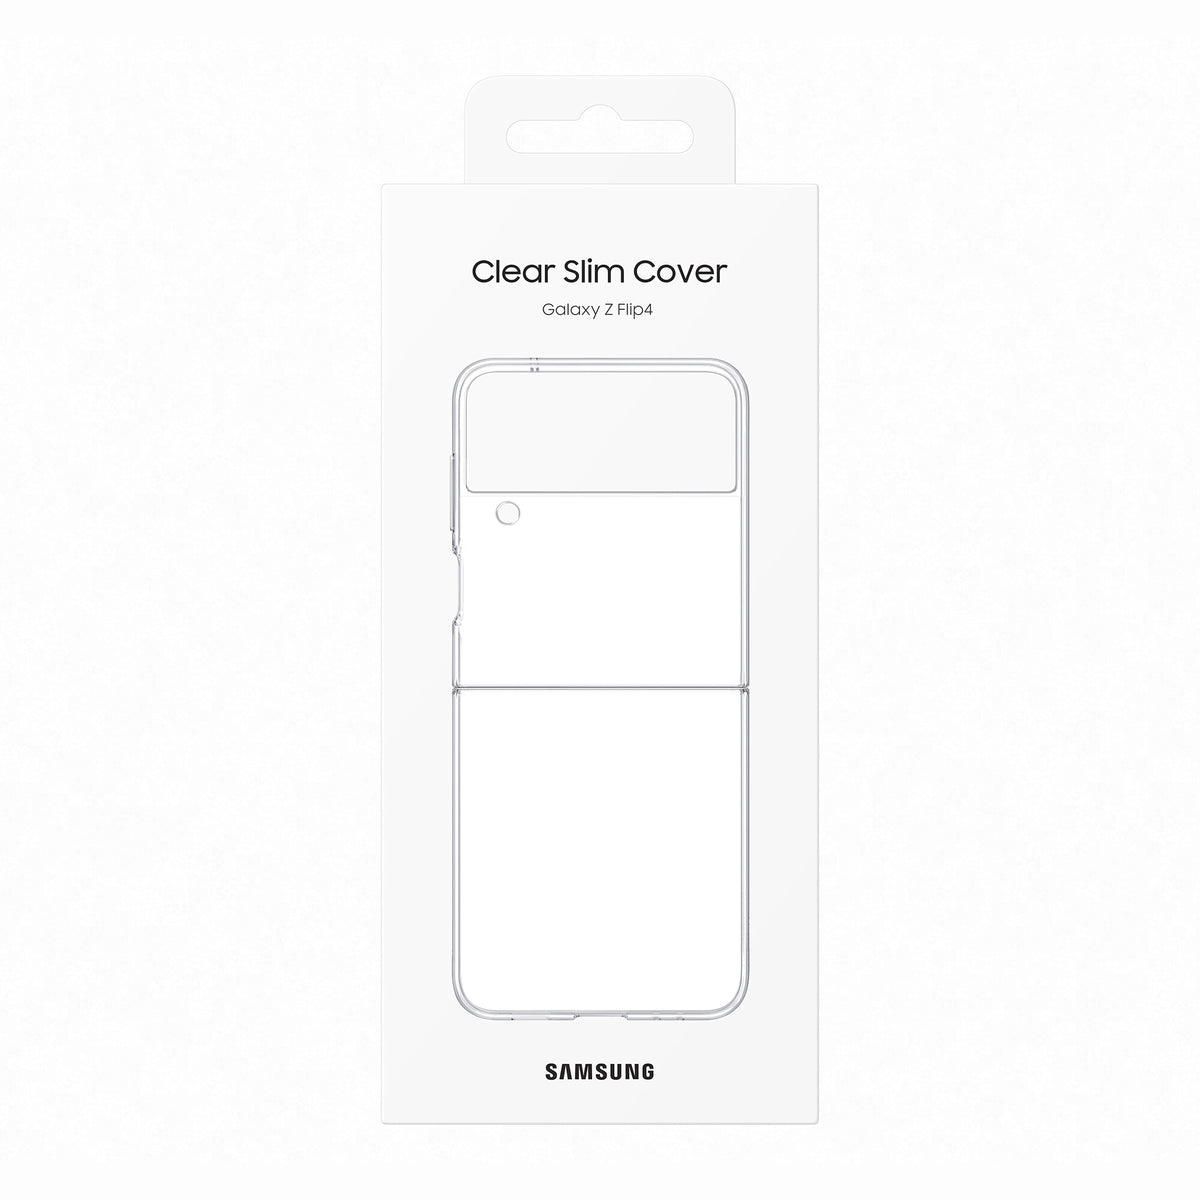 Samsung Clear Slim Cover for Galaxy Z Flip4 in Transparent